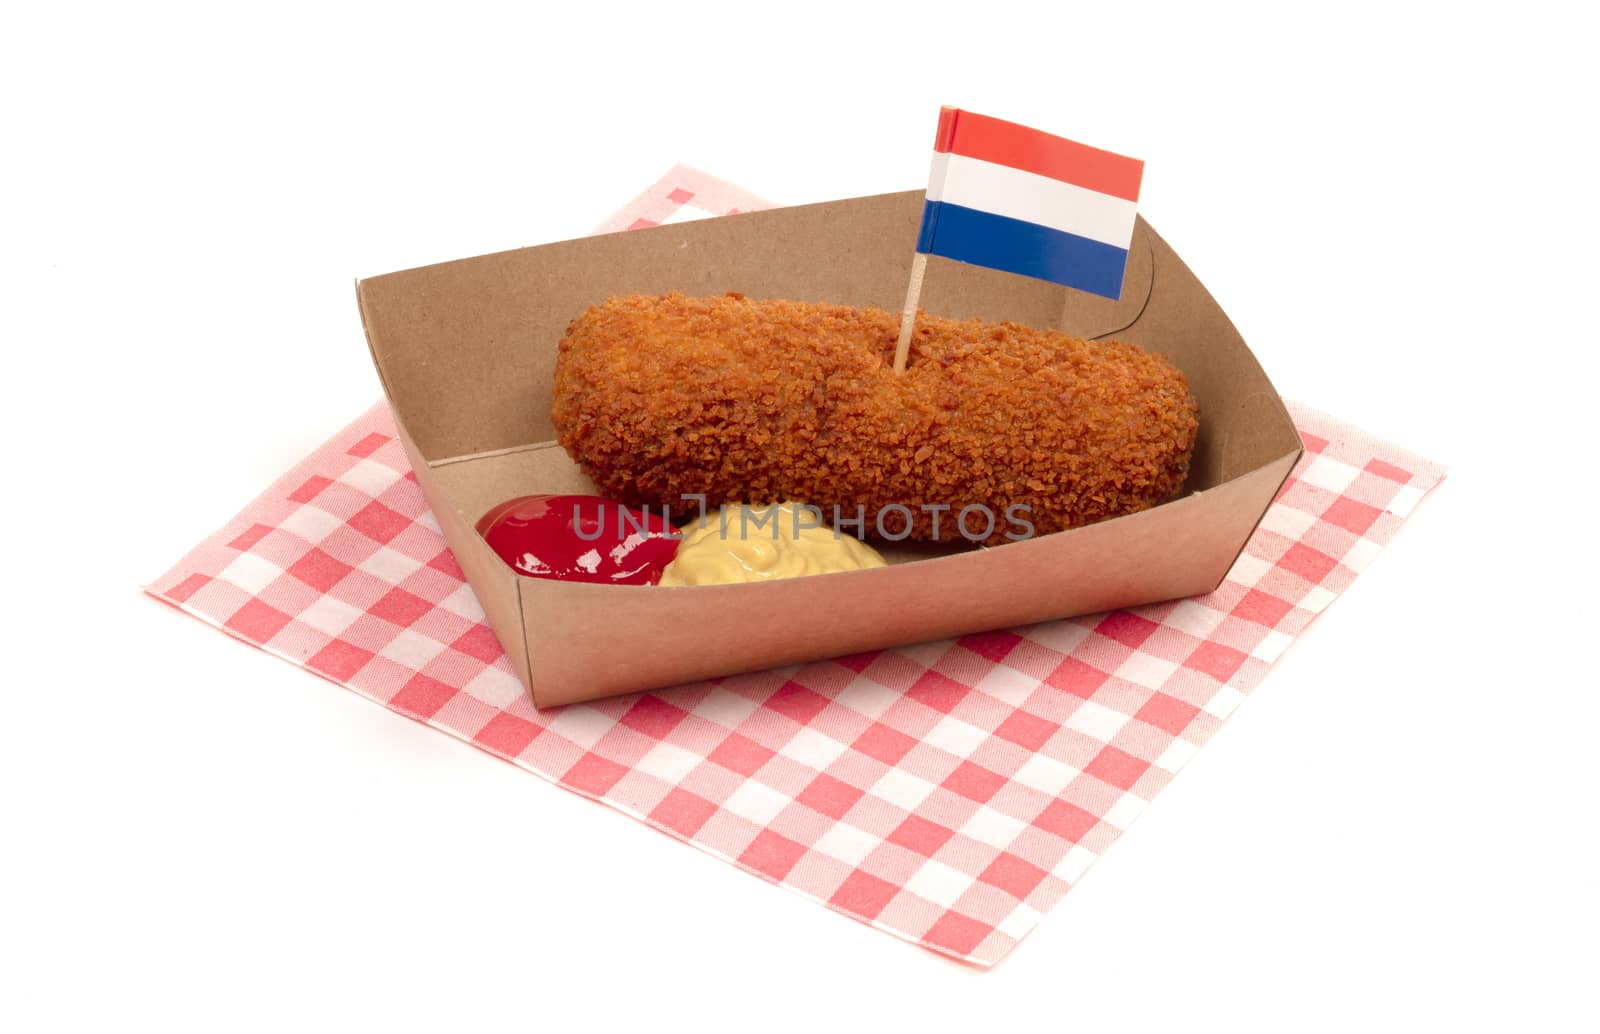 Brown crusty dutch kroket with mustard and ketchup isolated on a white background